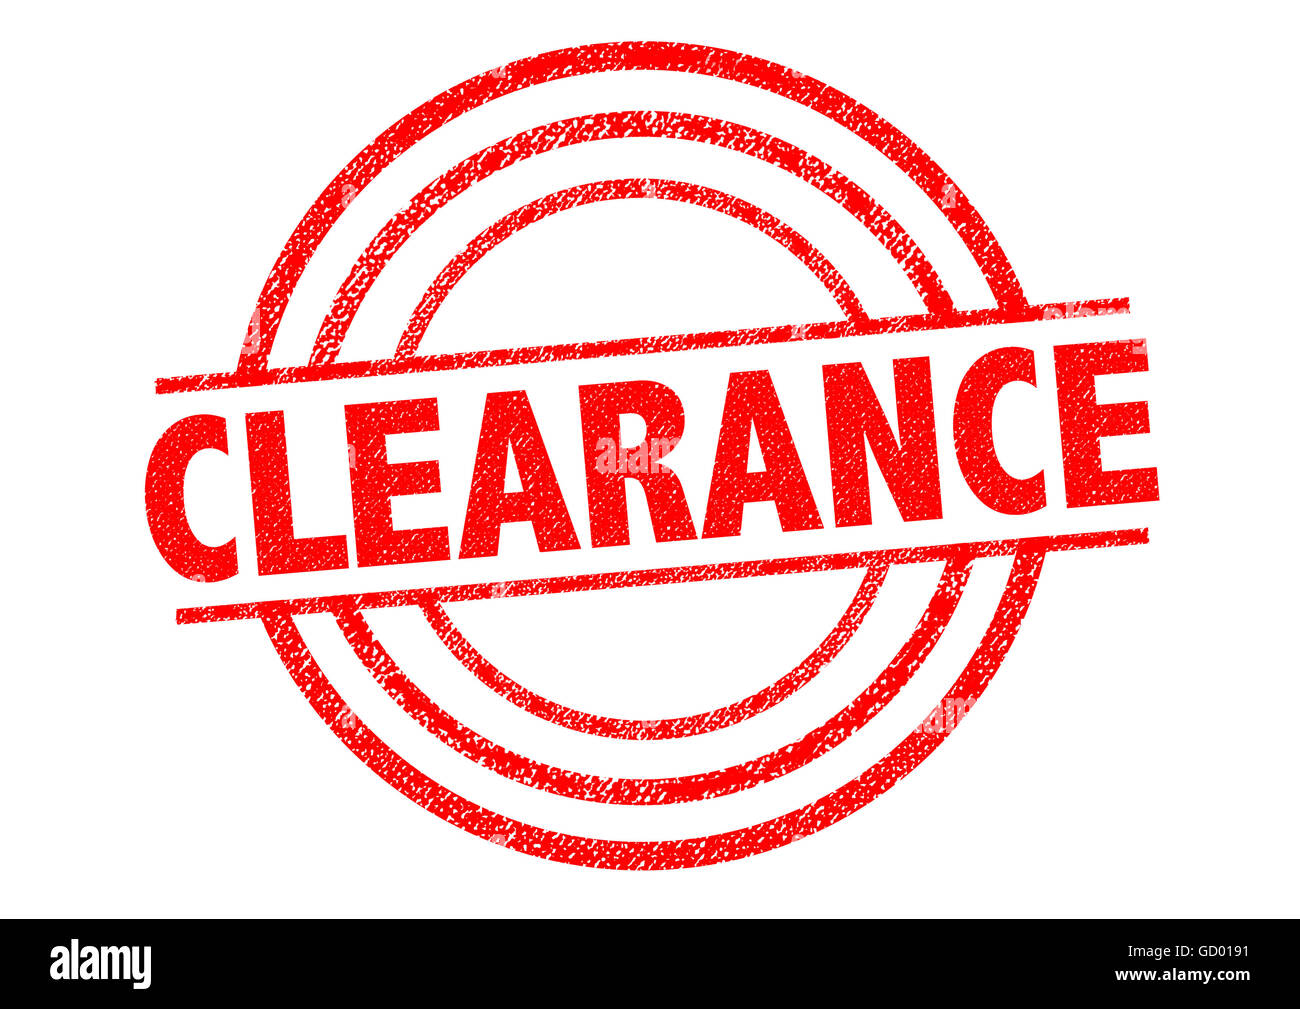 https://c8.alamy.com/comp/GD0191/clearance-red-rubber-stamp-over-a-white-background-GD0191.jpg